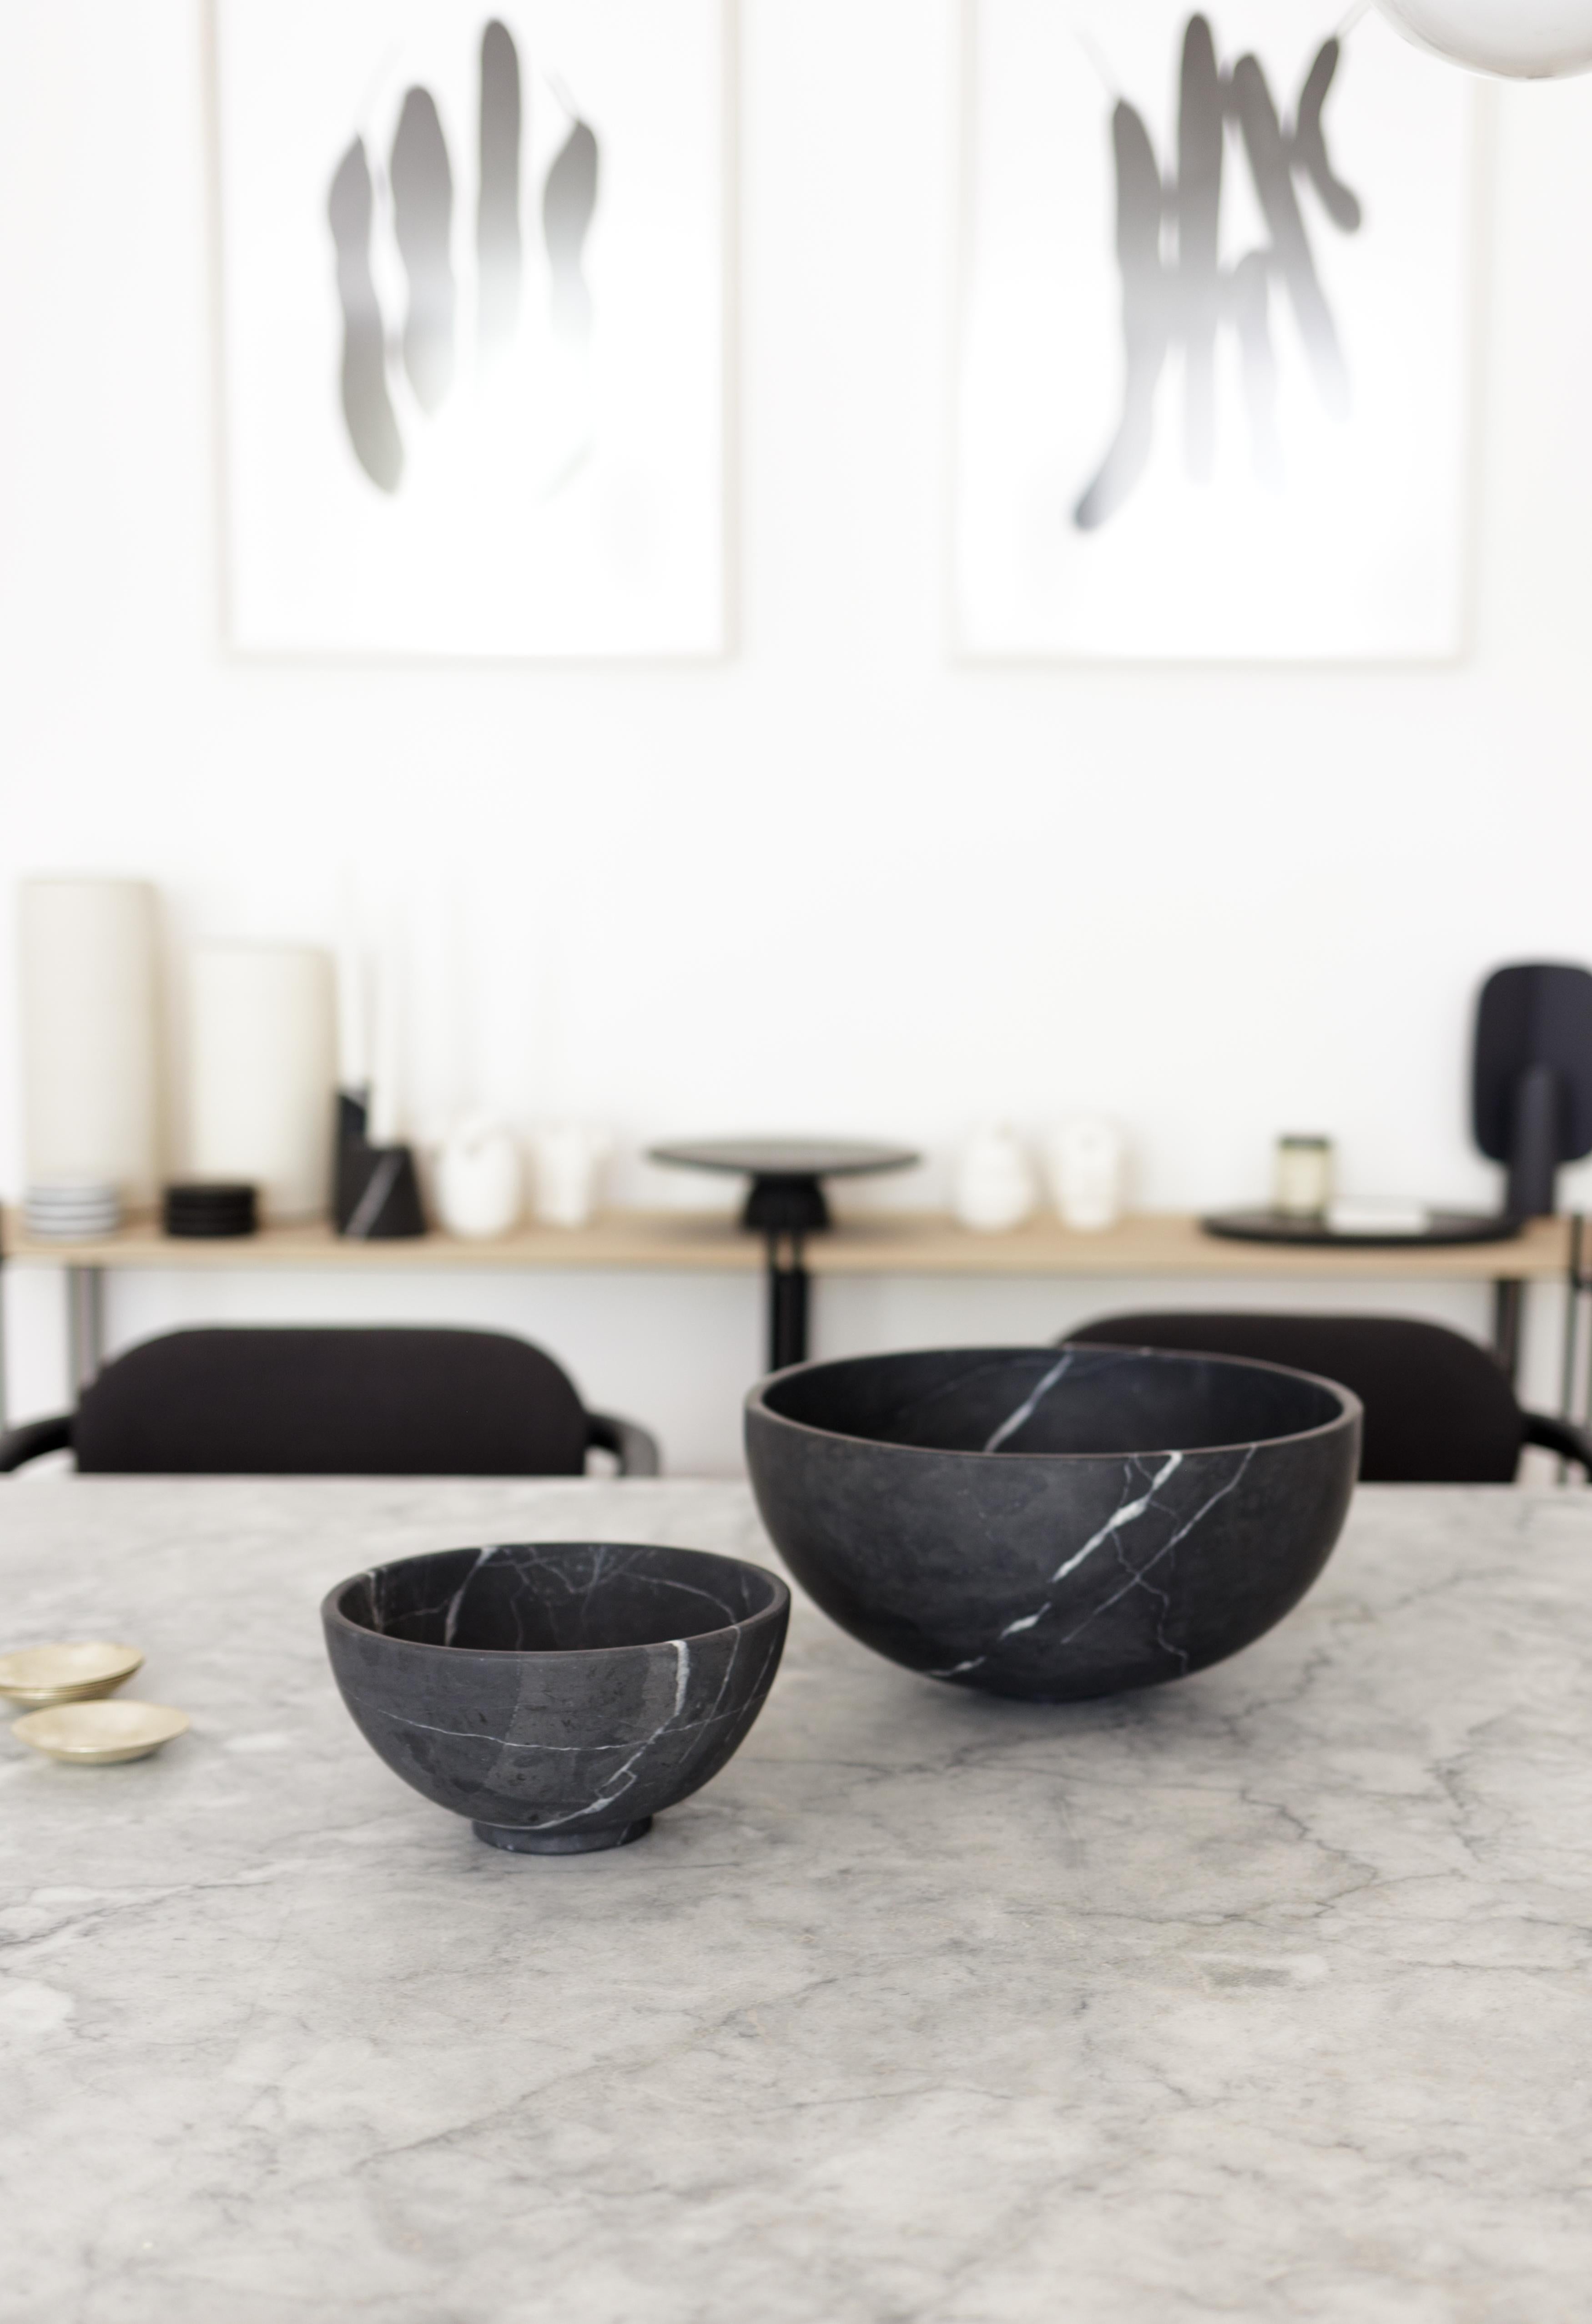 Large and small bowl in carved Monterrey black marble. Set of 2. Handmade in Mexico by local craftsmen.   Dimensions:  Small: 20 D x 20 W x 10 H cm Large: 30 D x 30 W x 15 H cm.  Production time: 6-8 weeks for items without marble / 13-14 weeks for